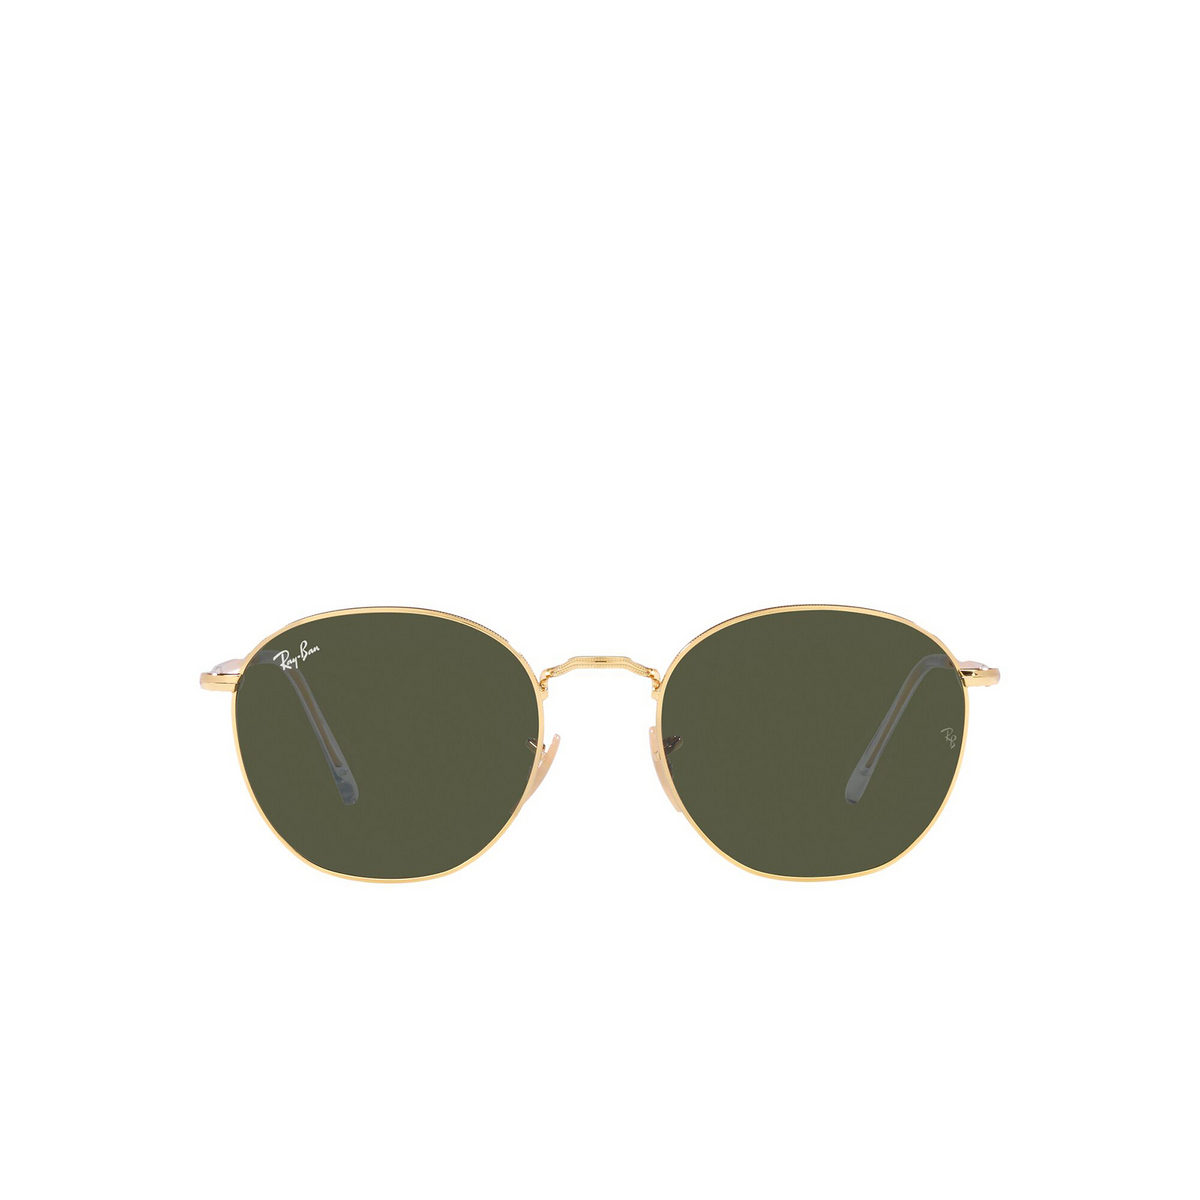 Ray-Ban® Irregular Sunglasses: Rob RB3772 color Arista 001/31 - front view.